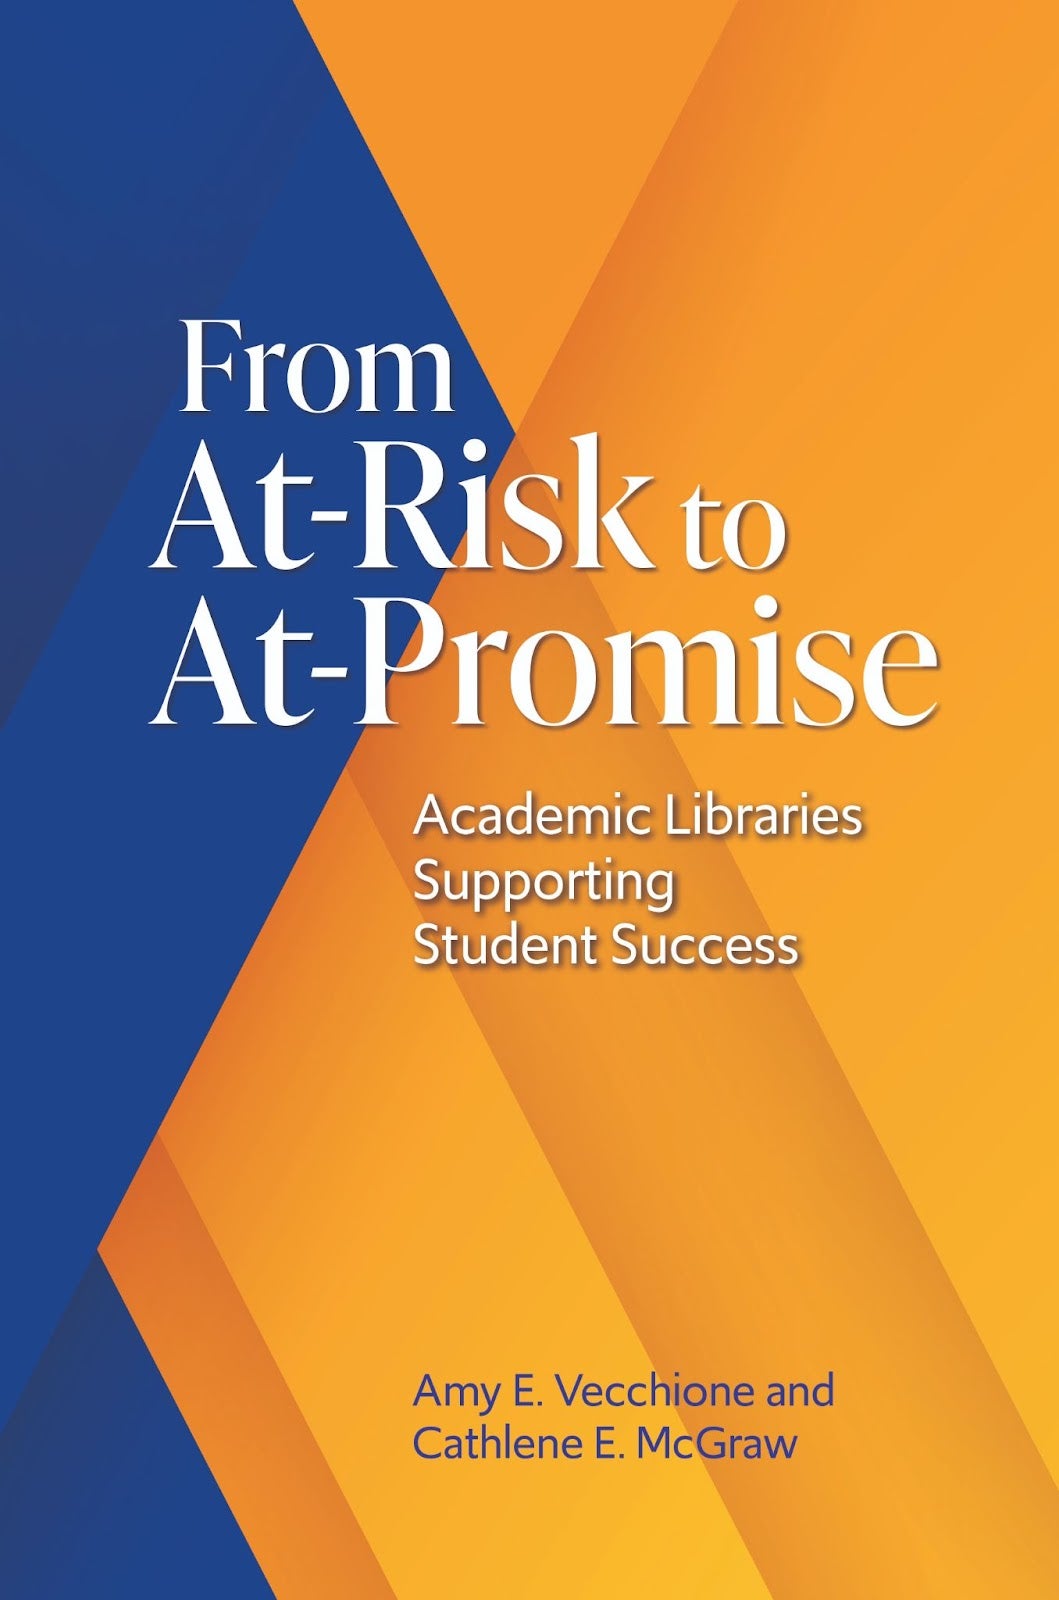 "From At-Risk to At-Promise: Academic Libraries Supporting Student Success" by Amy E. Vecchione and Cathlene E. McGraw